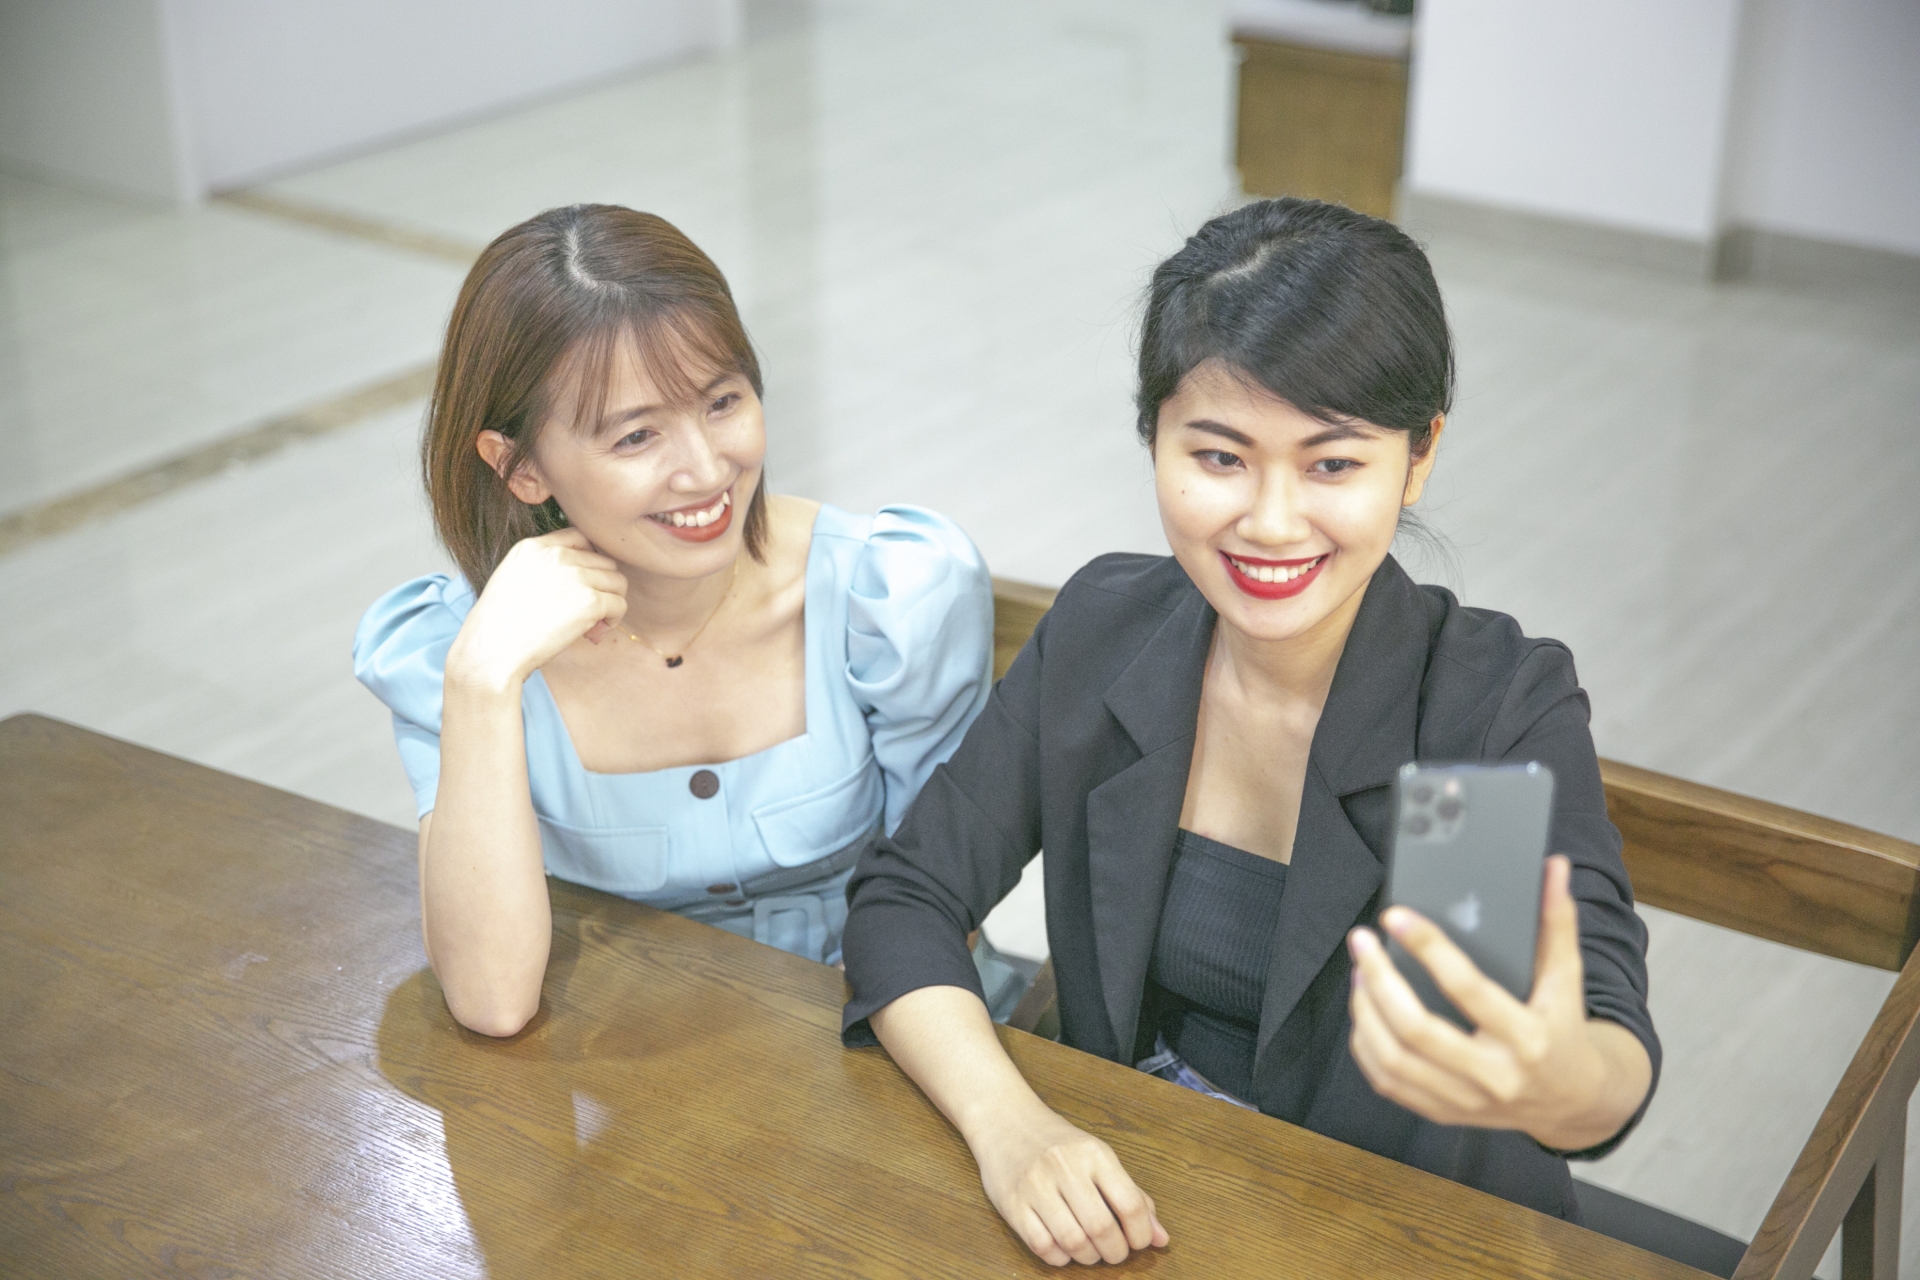 vietcombank launches ekyc allowing customers to open accounts anywhere within minutes